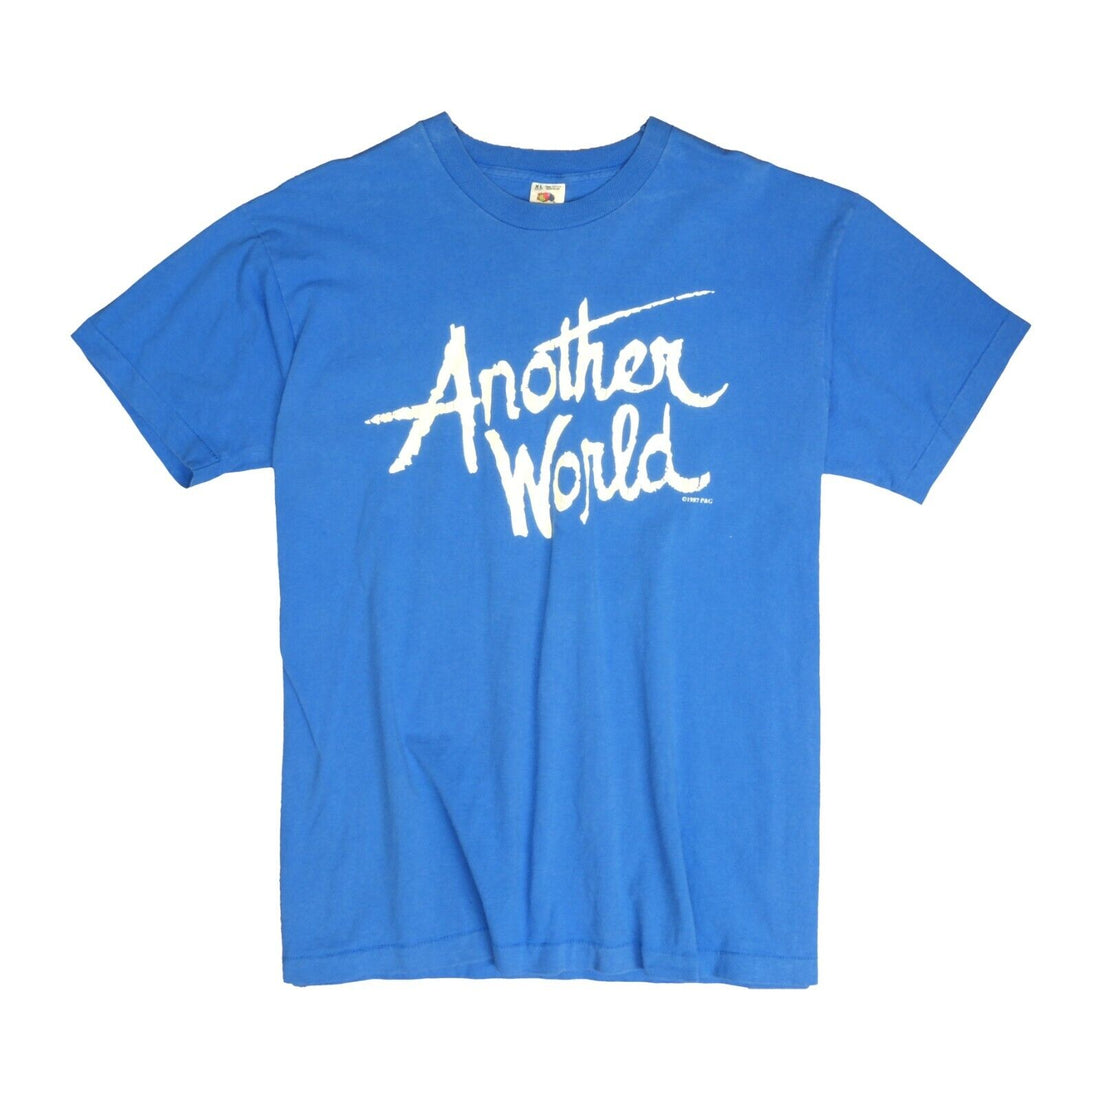 Vintage Another World T-Shirt Size XL Blue TV Show Promo 1987 80s